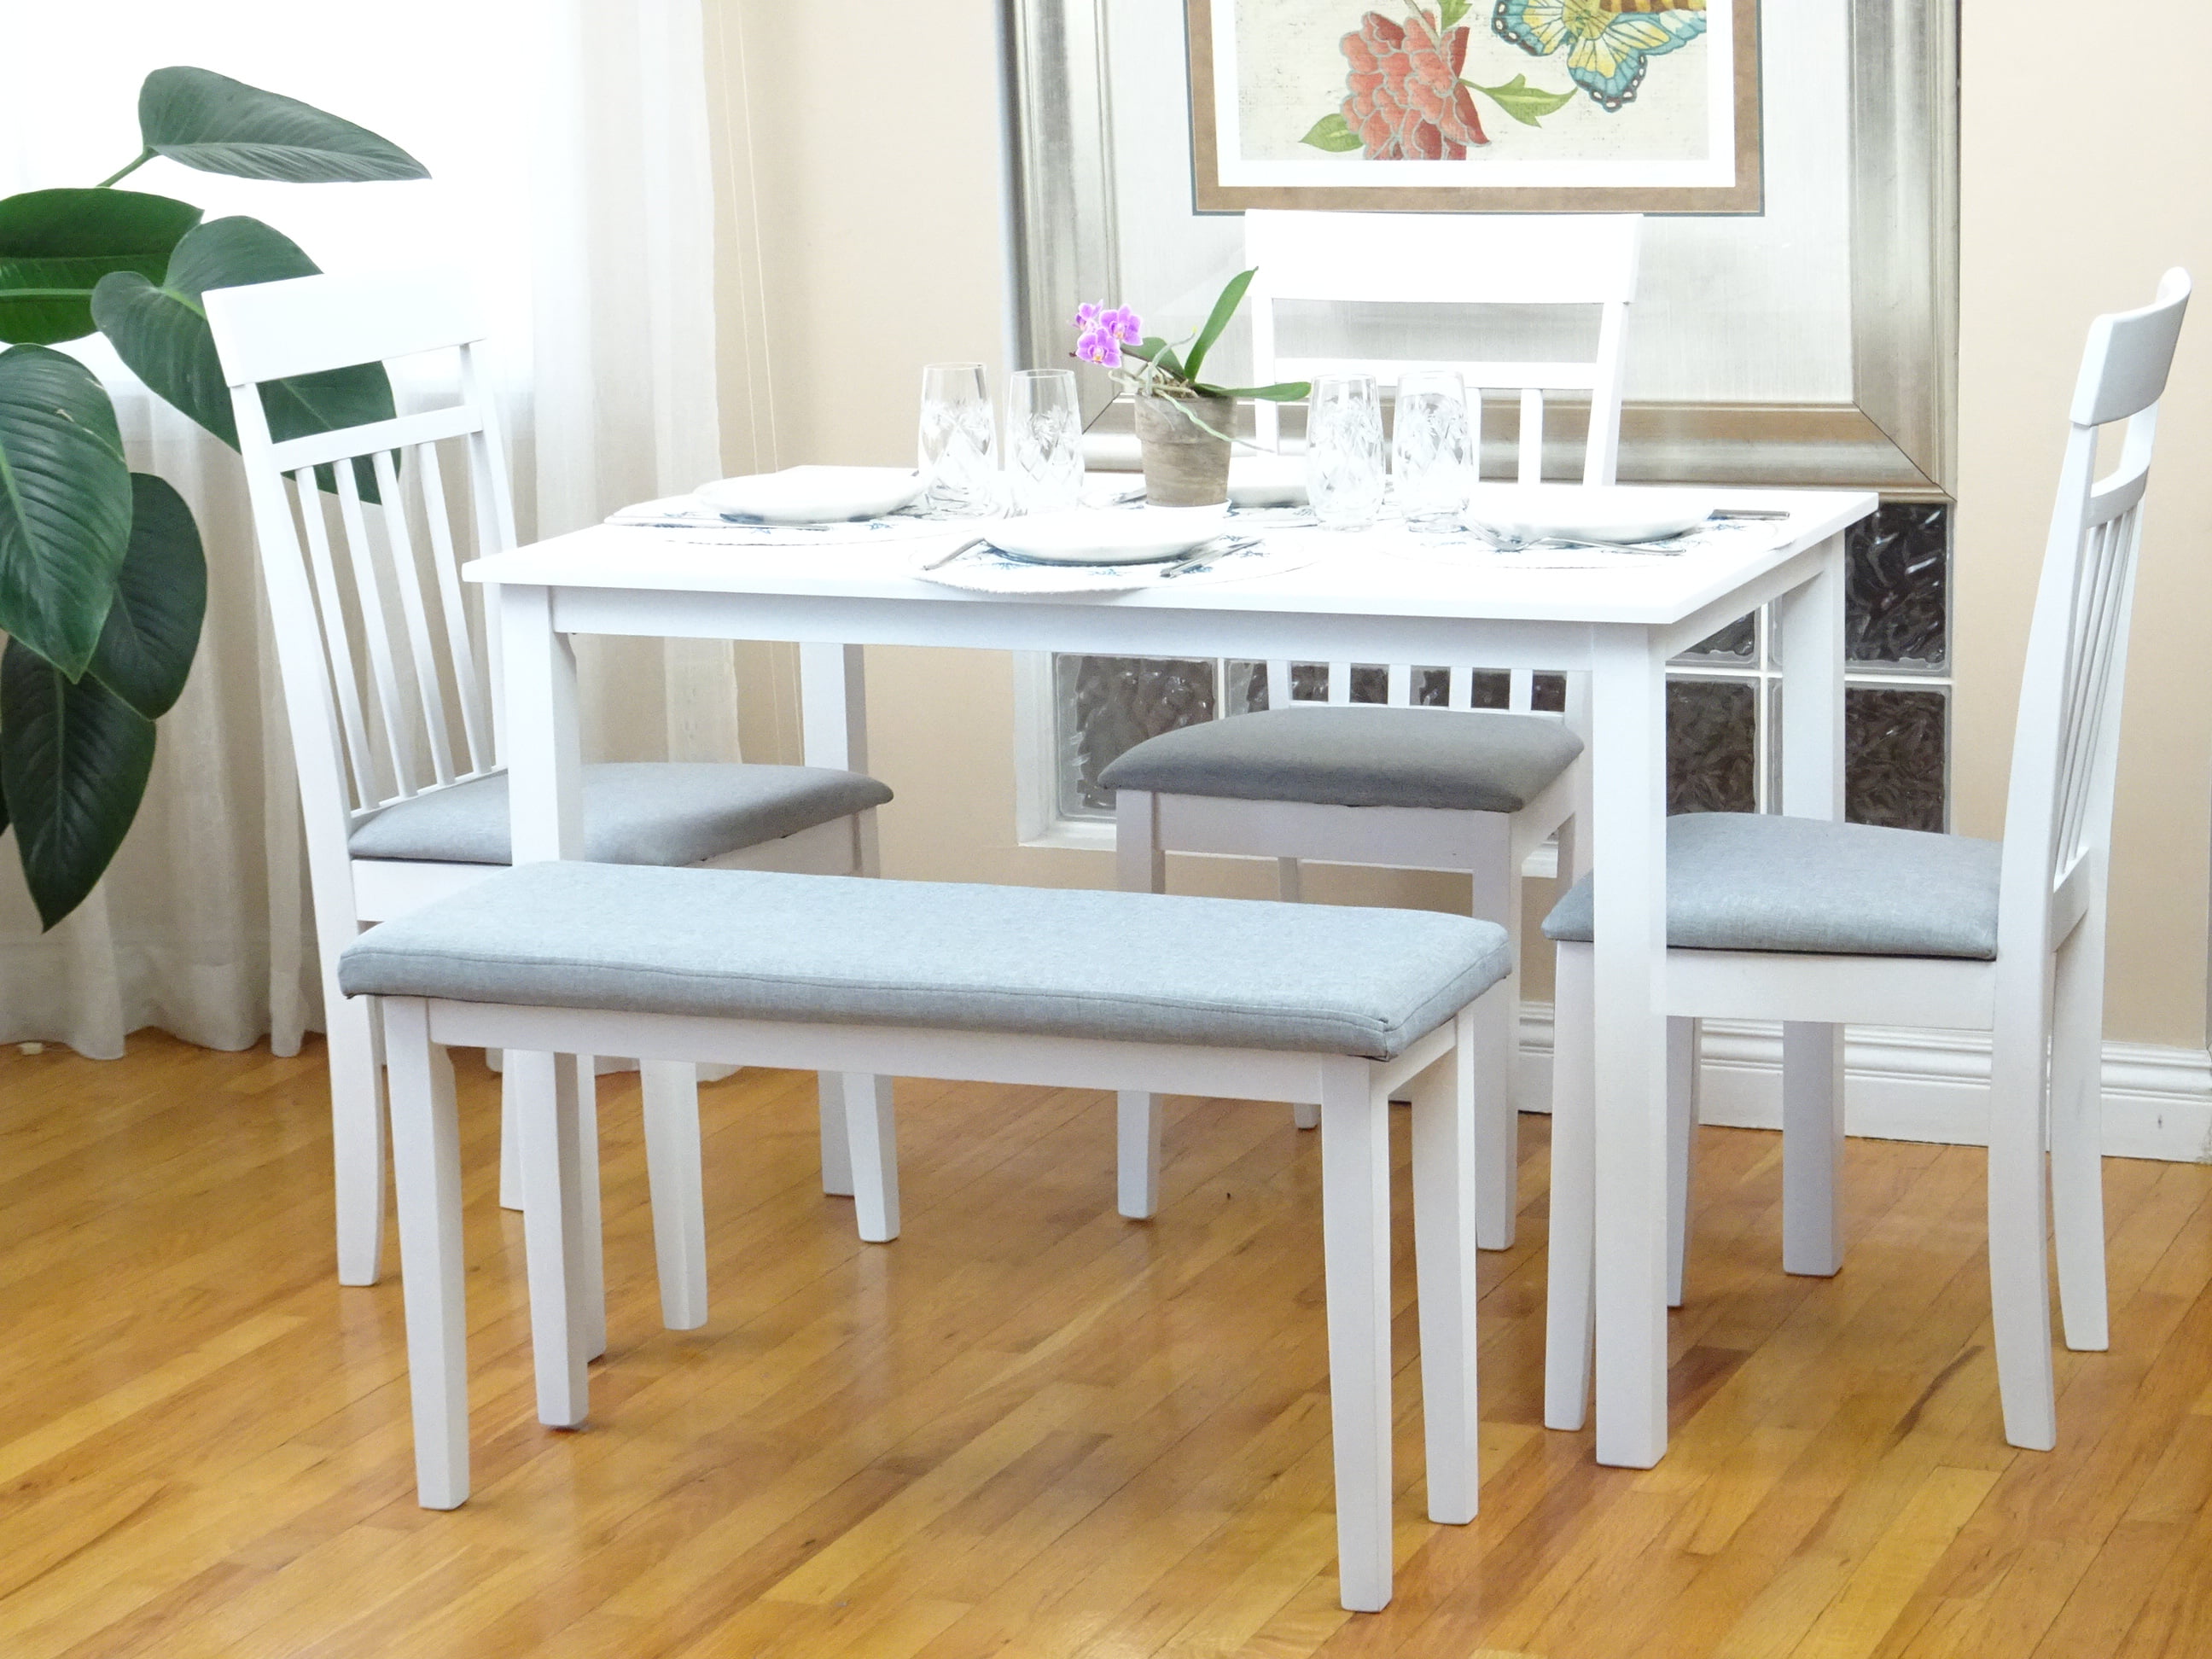 kitchen table set with bench and chairs